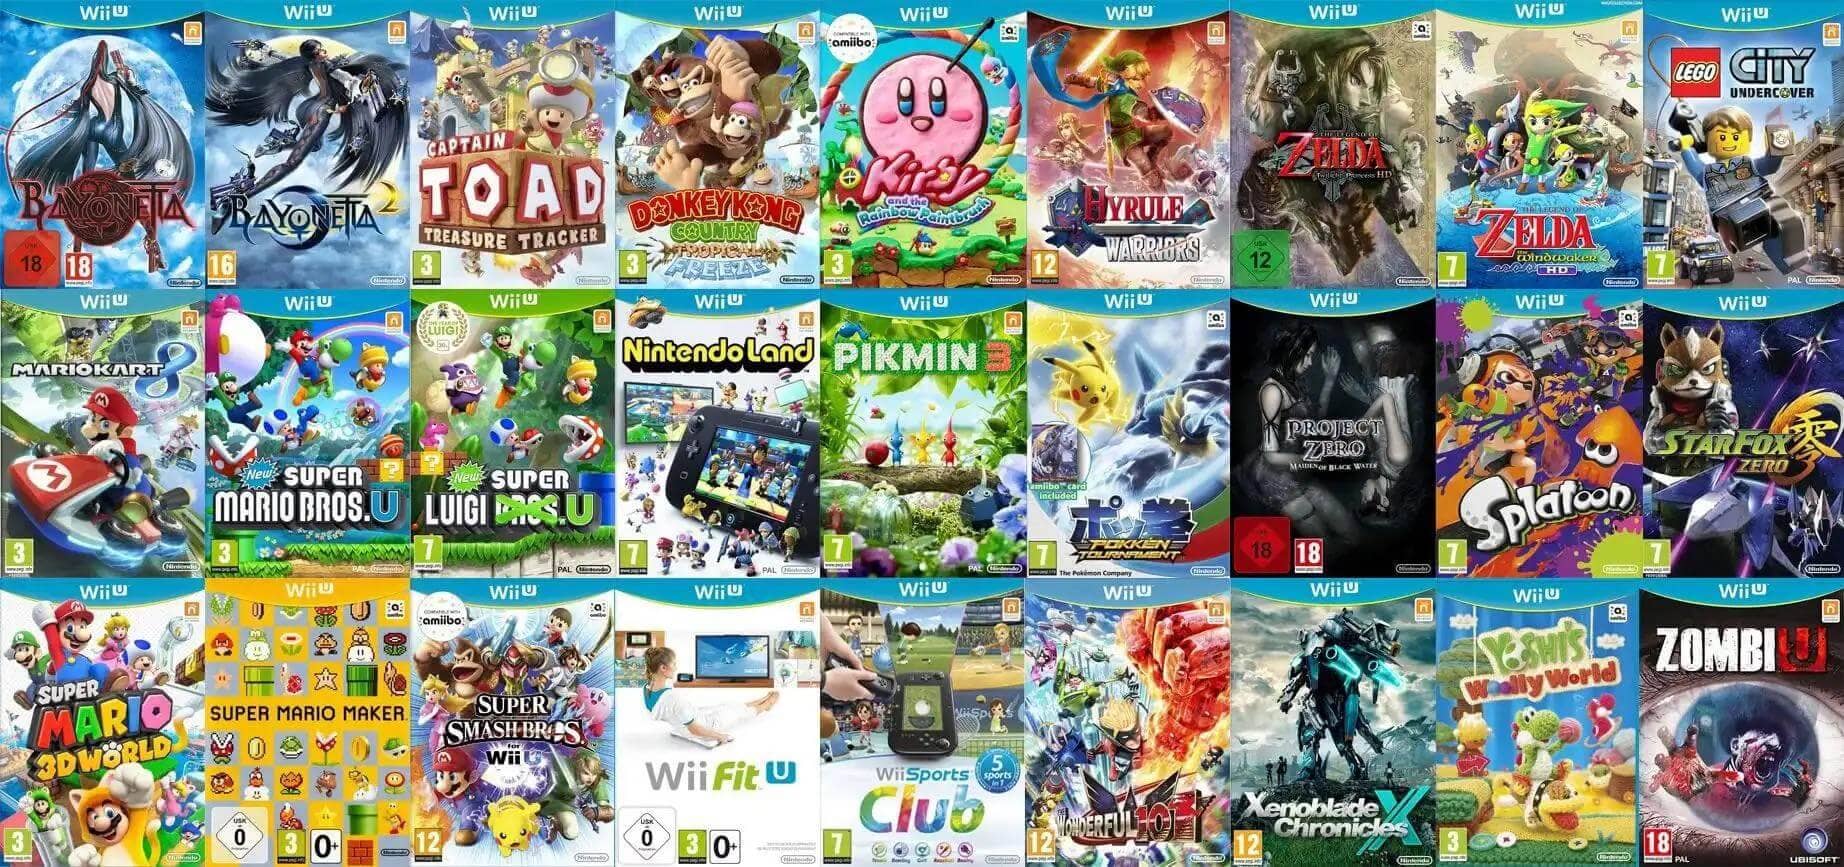 Yeah, Wii U has some pretty good games, too